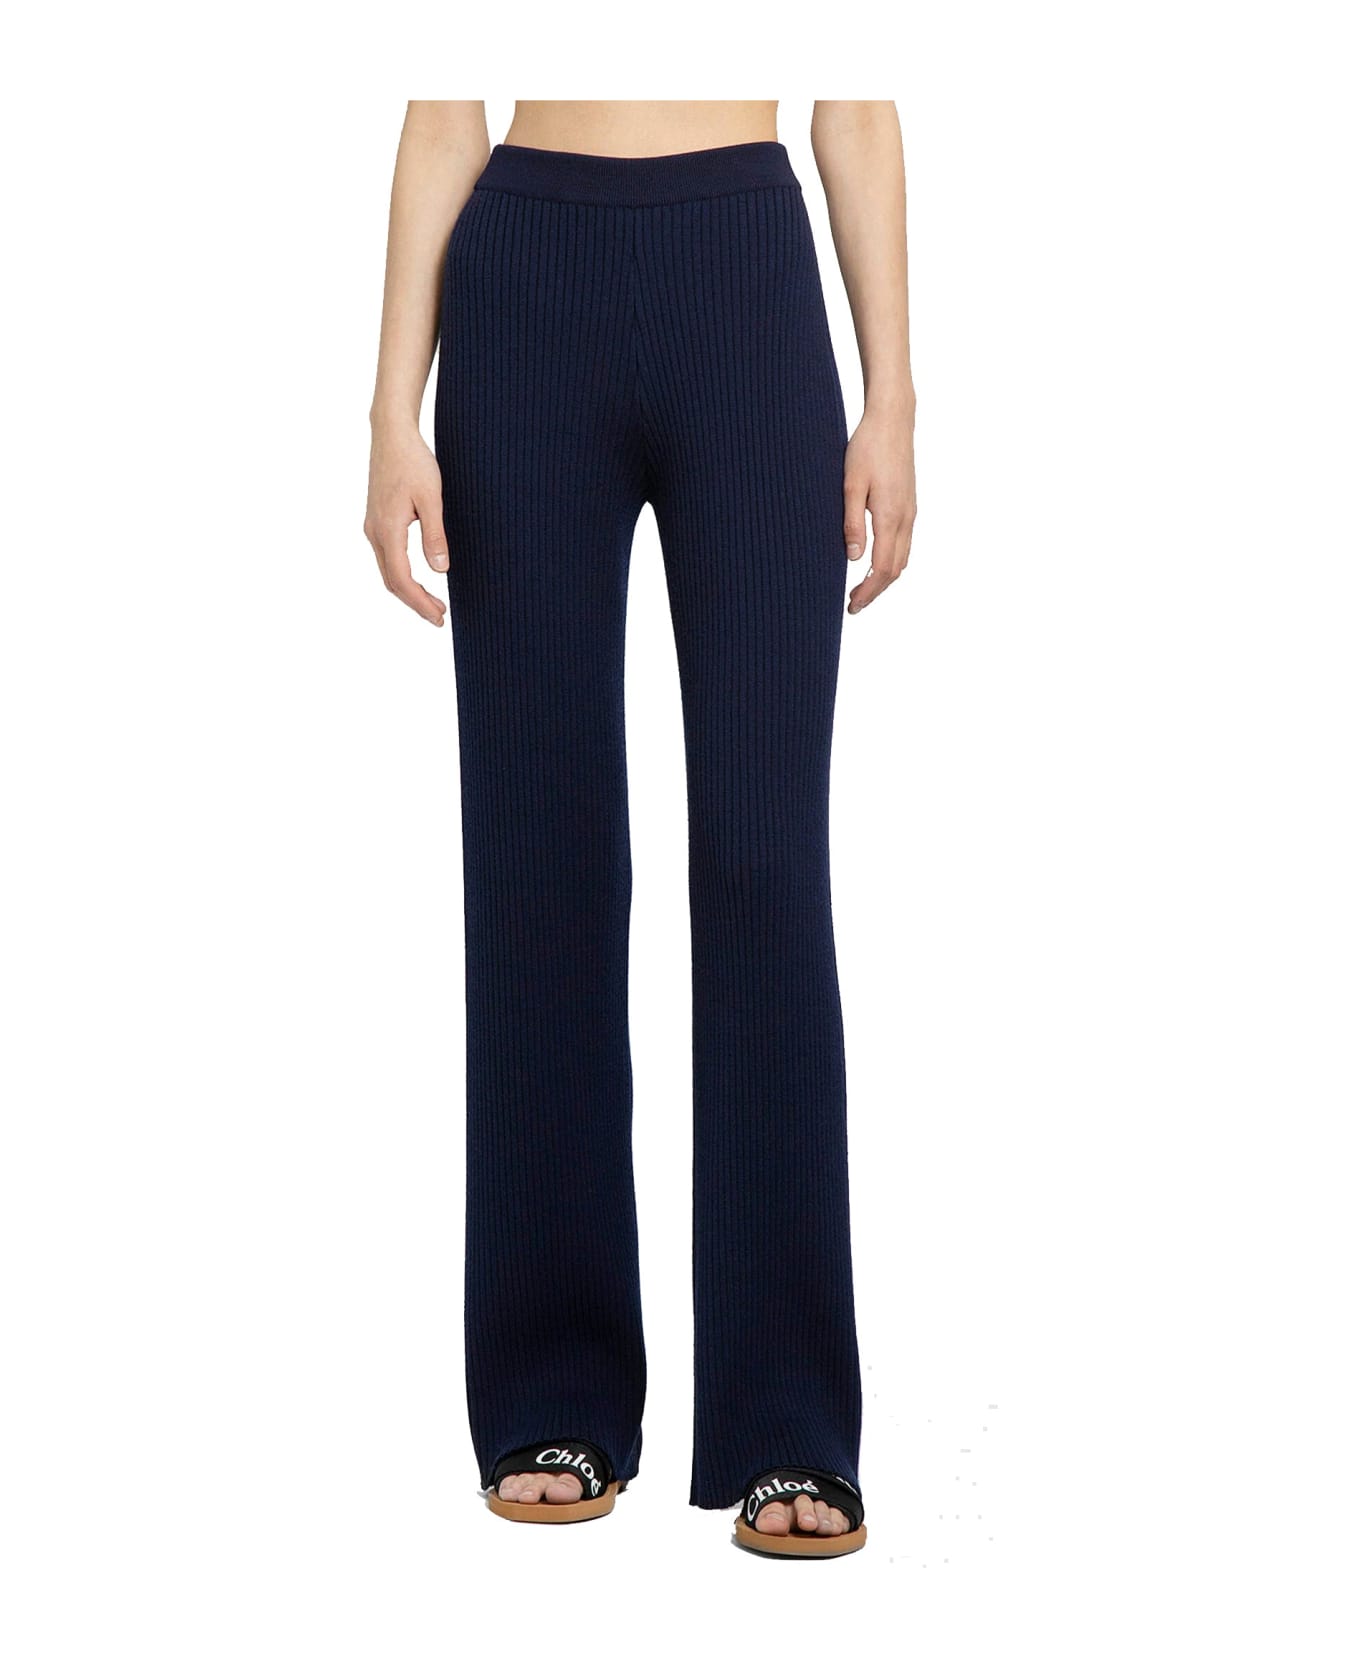 Chloé Wool And Cashmere Pants - Blue ボトムス